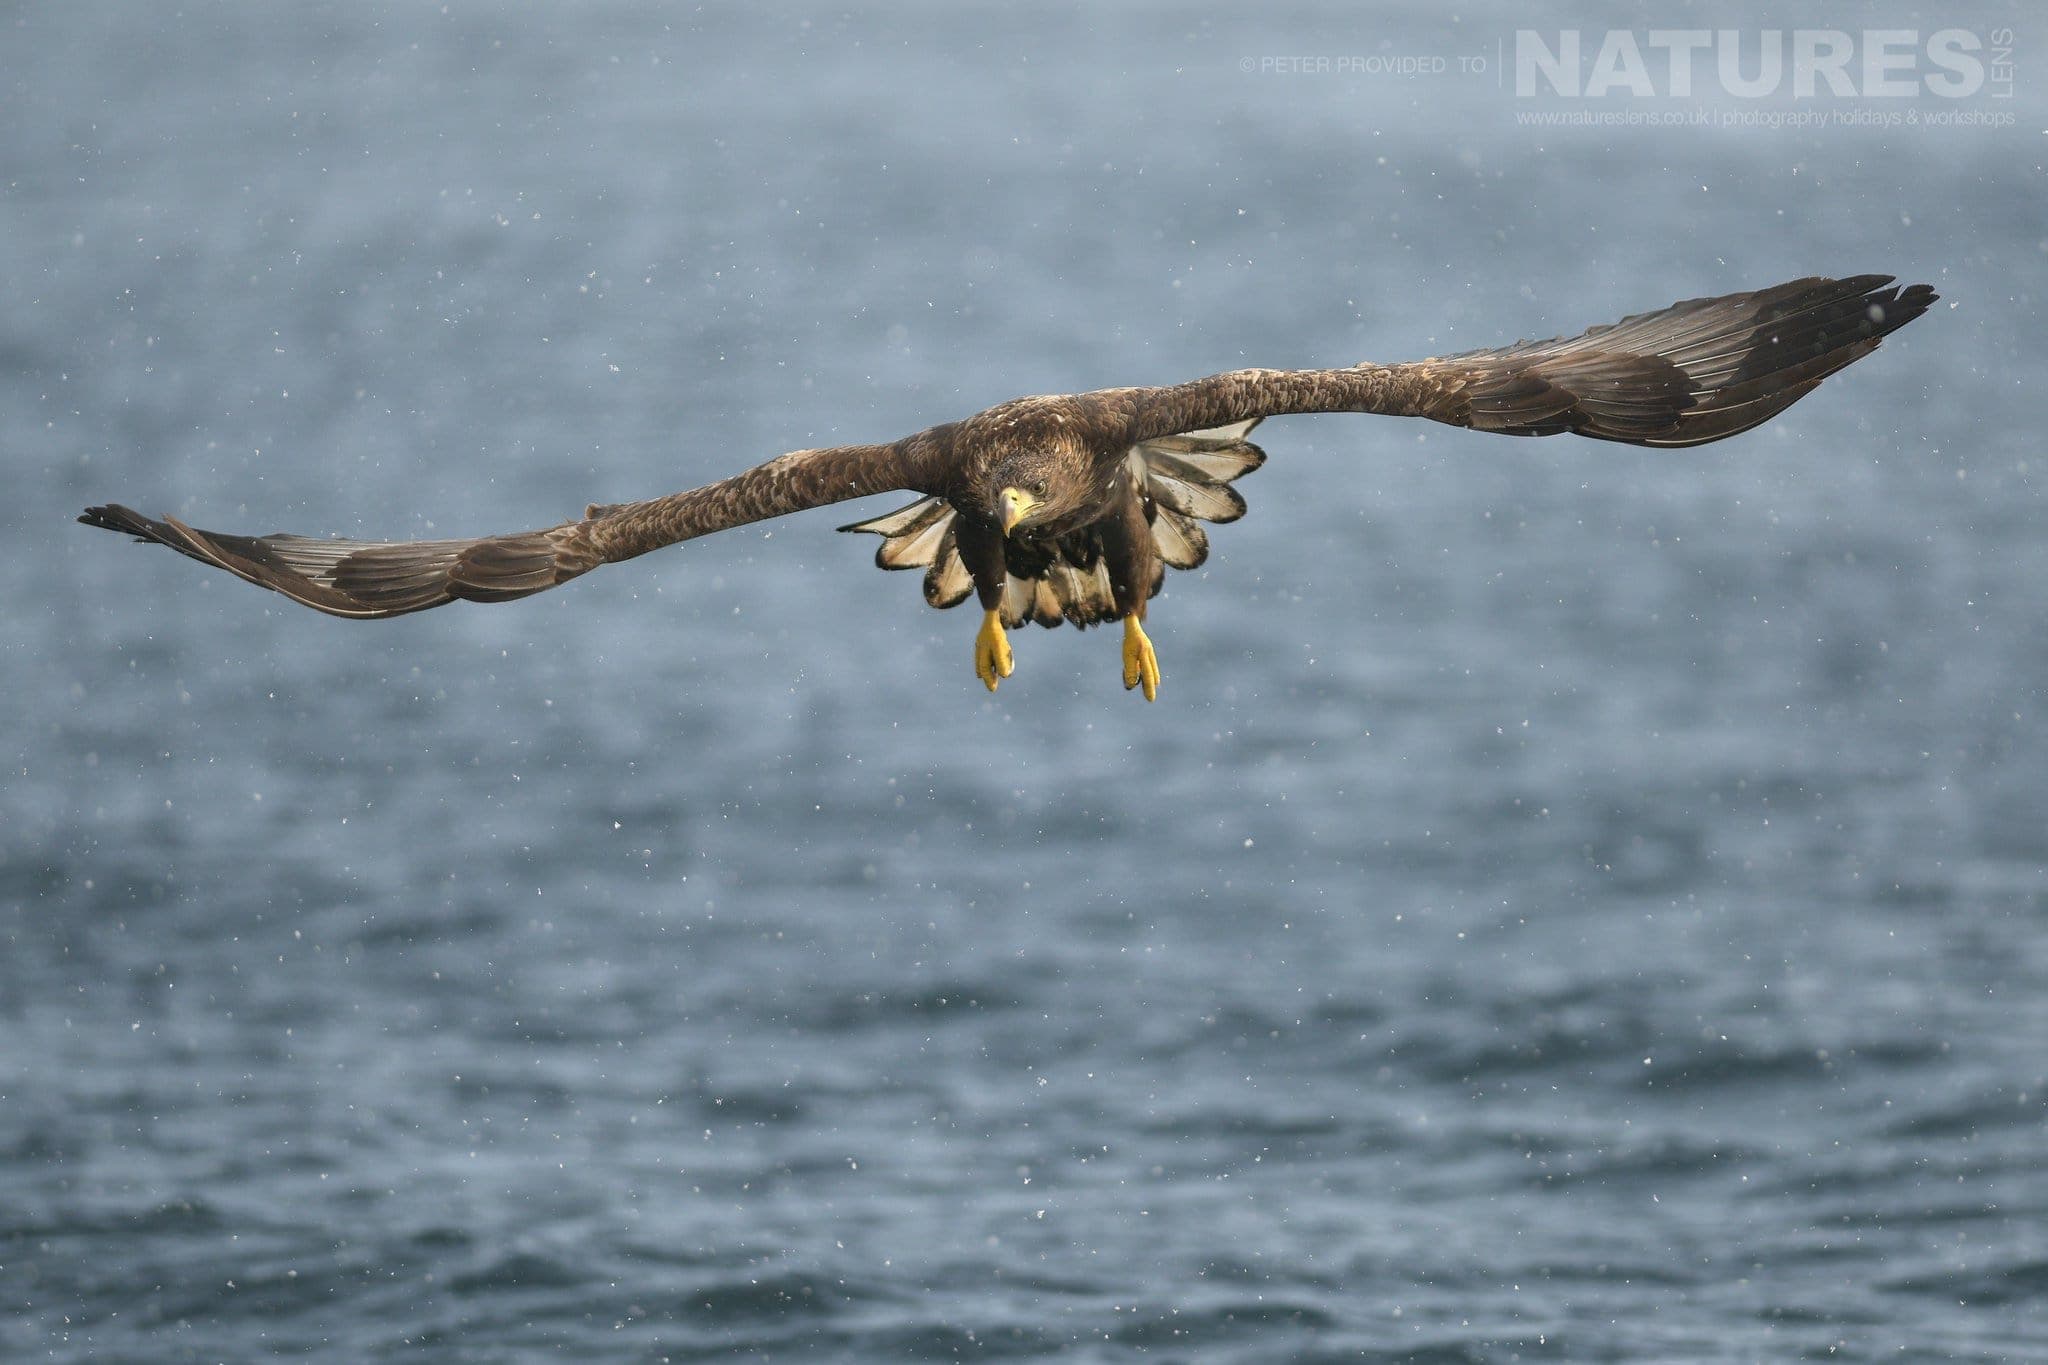 A White Tailed Sea Eagle Flies Over The Pack Ice Laden Seas Outside Rausu This Image Was Captured On The Island Of Hokkaido During The Natureslens Winter Wildlife Of Japan Photography Holiday